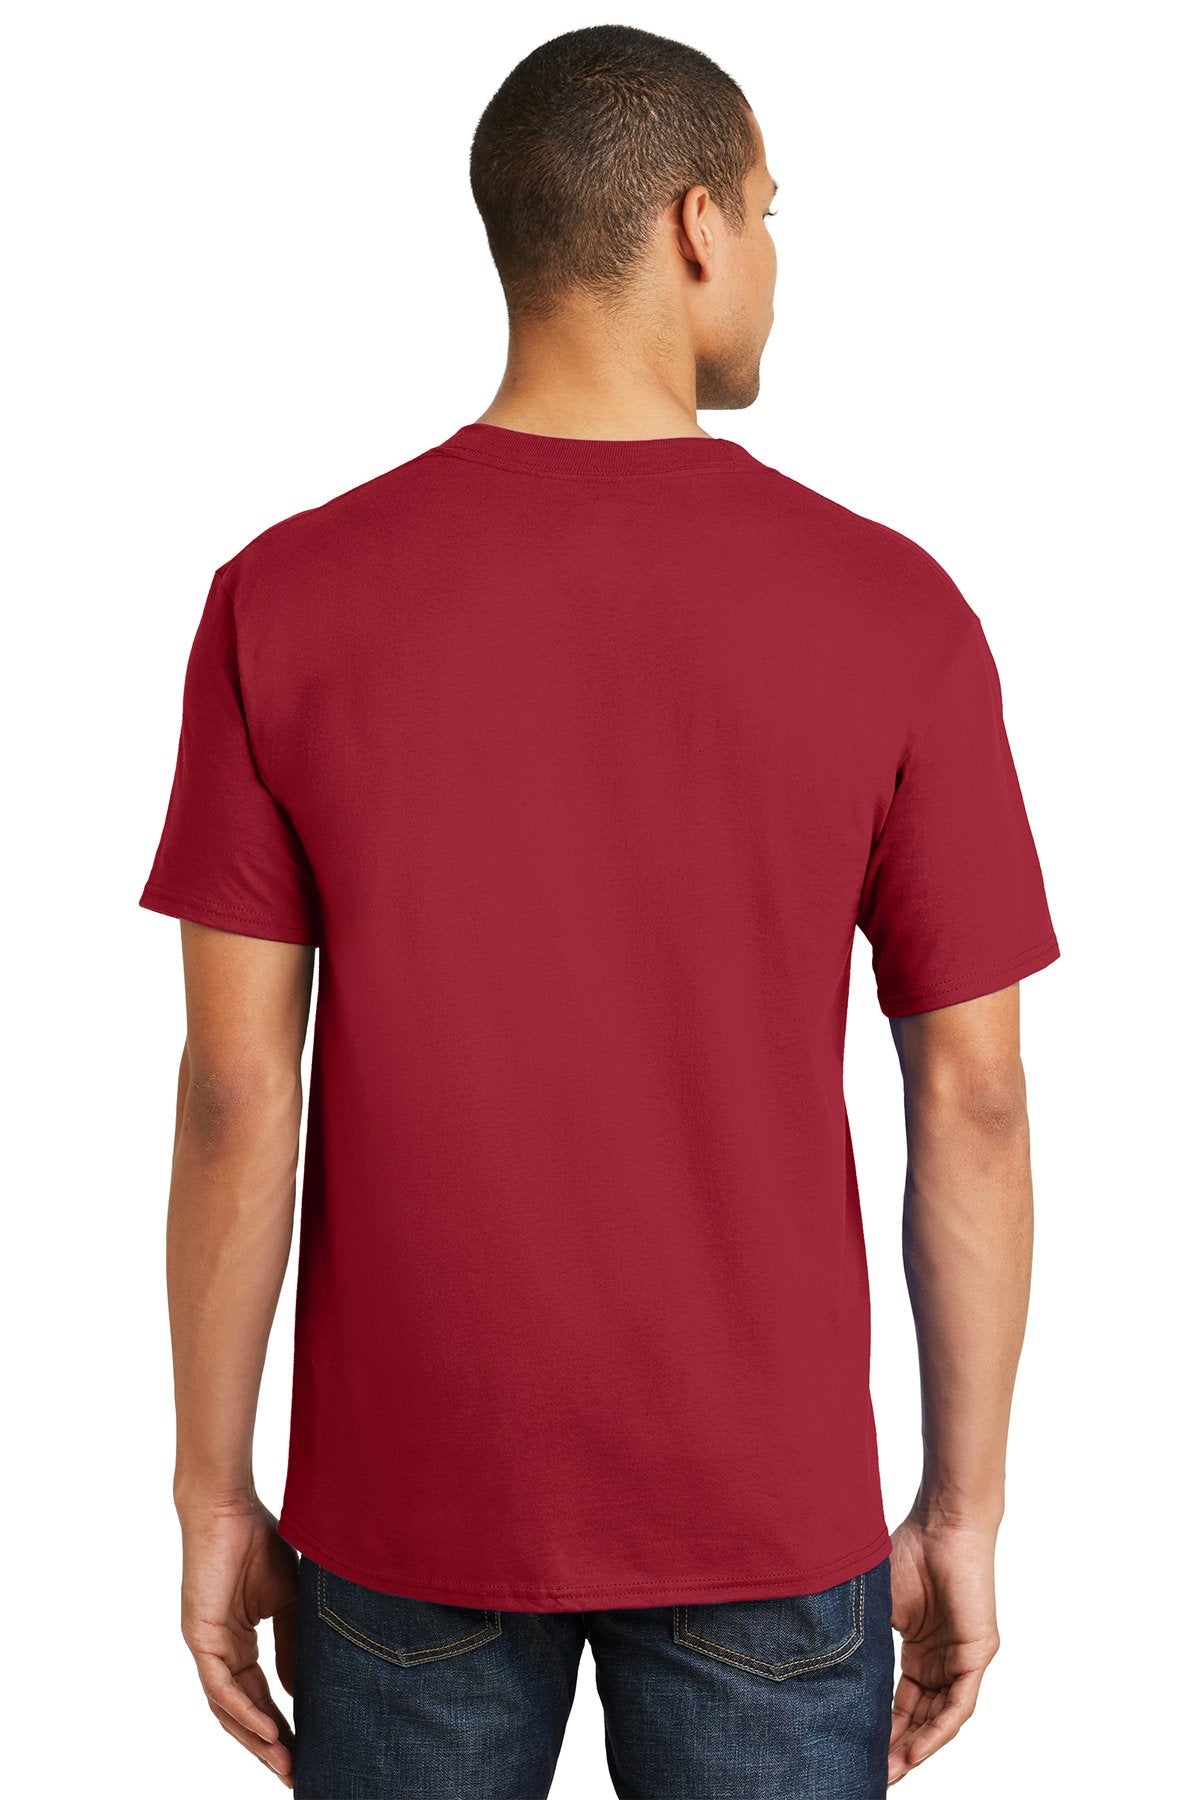 hanes beefy cotton t shirt 5180 deep red